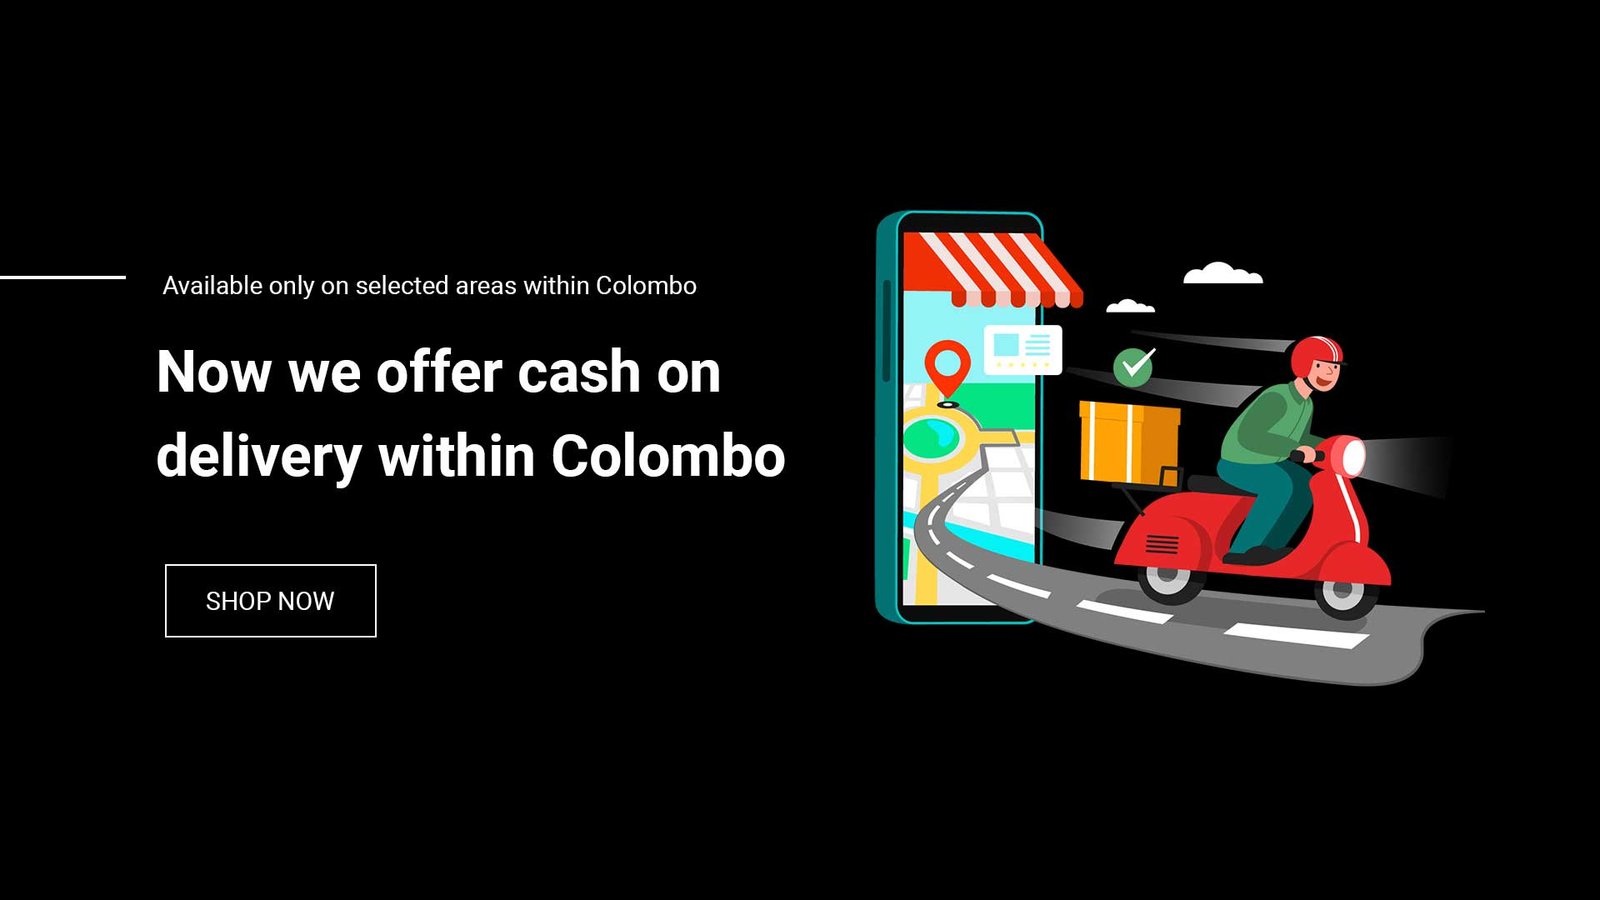 Cash on delivery within Colombo uandt International